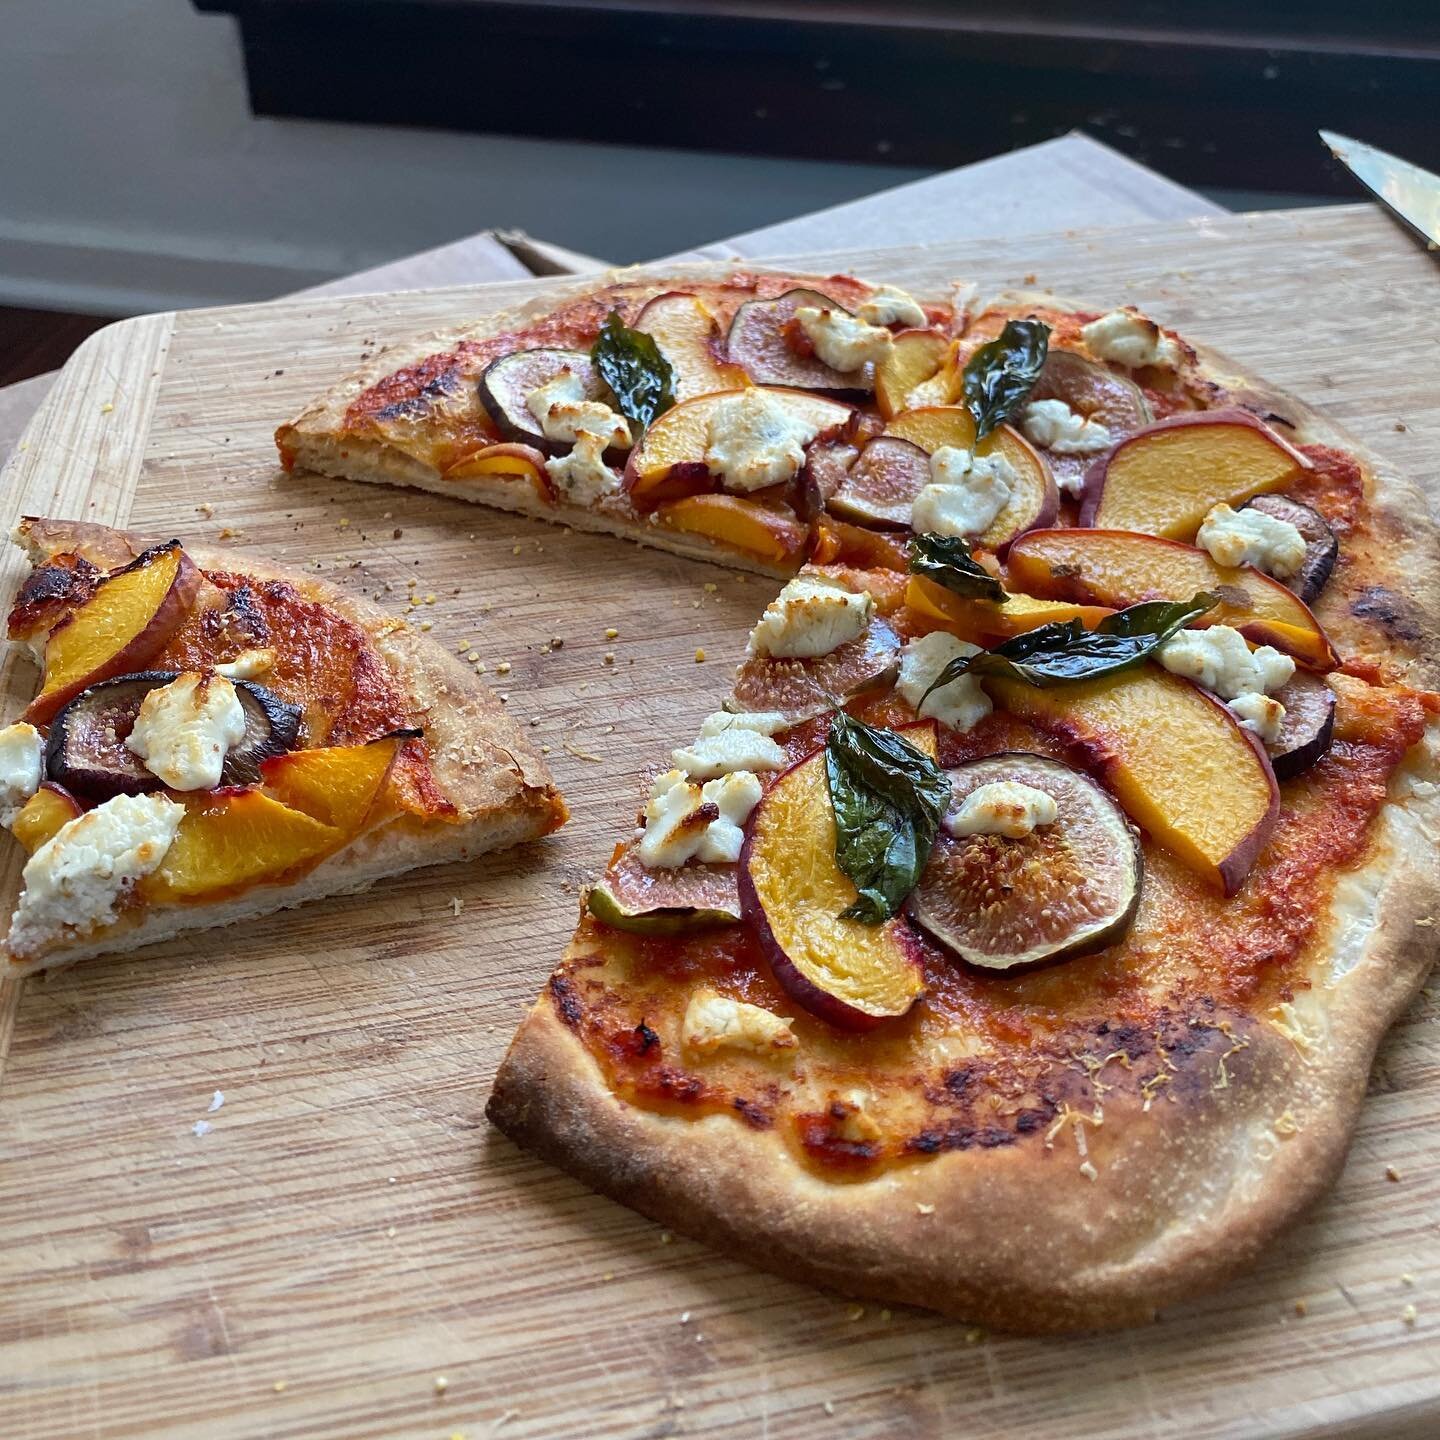 Eric cooking. Peach, fig, and goat cheese pizza. #pizza #figs #homecooking